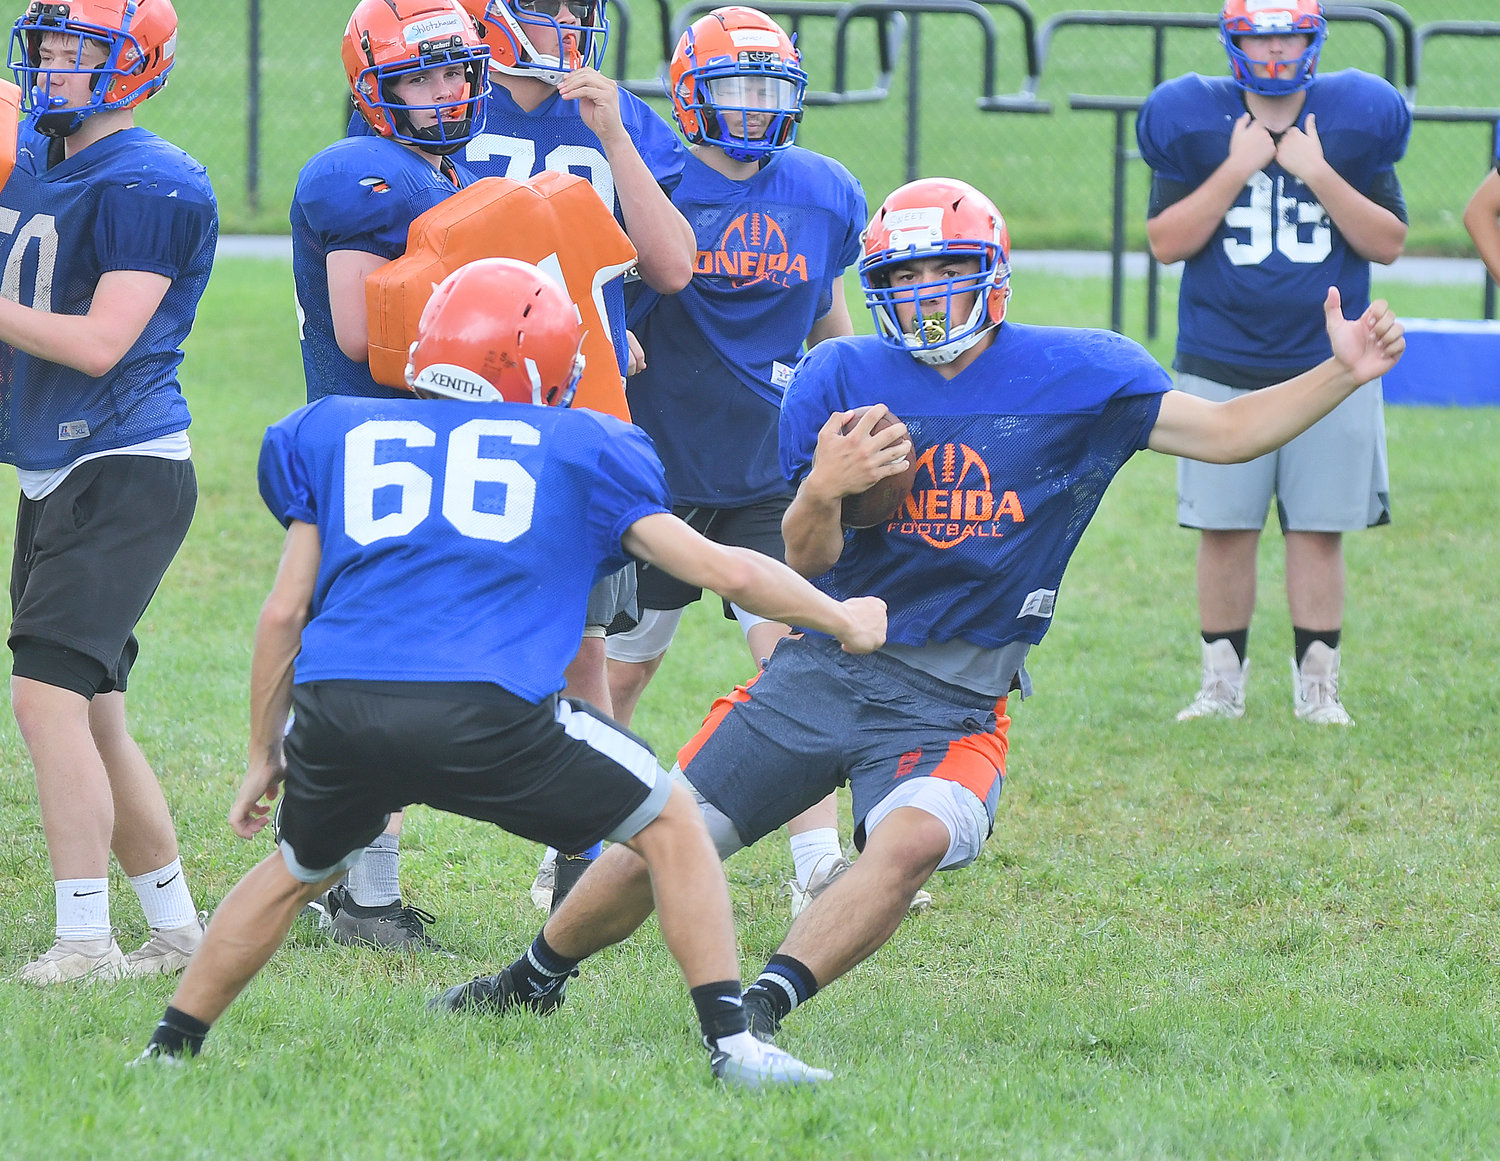 Oneida junior running back Gavin Sweet makes a move around a defender during a preseason practice. Sweet is half of a one-two punch with fellow junior running back Pierce Relyea.